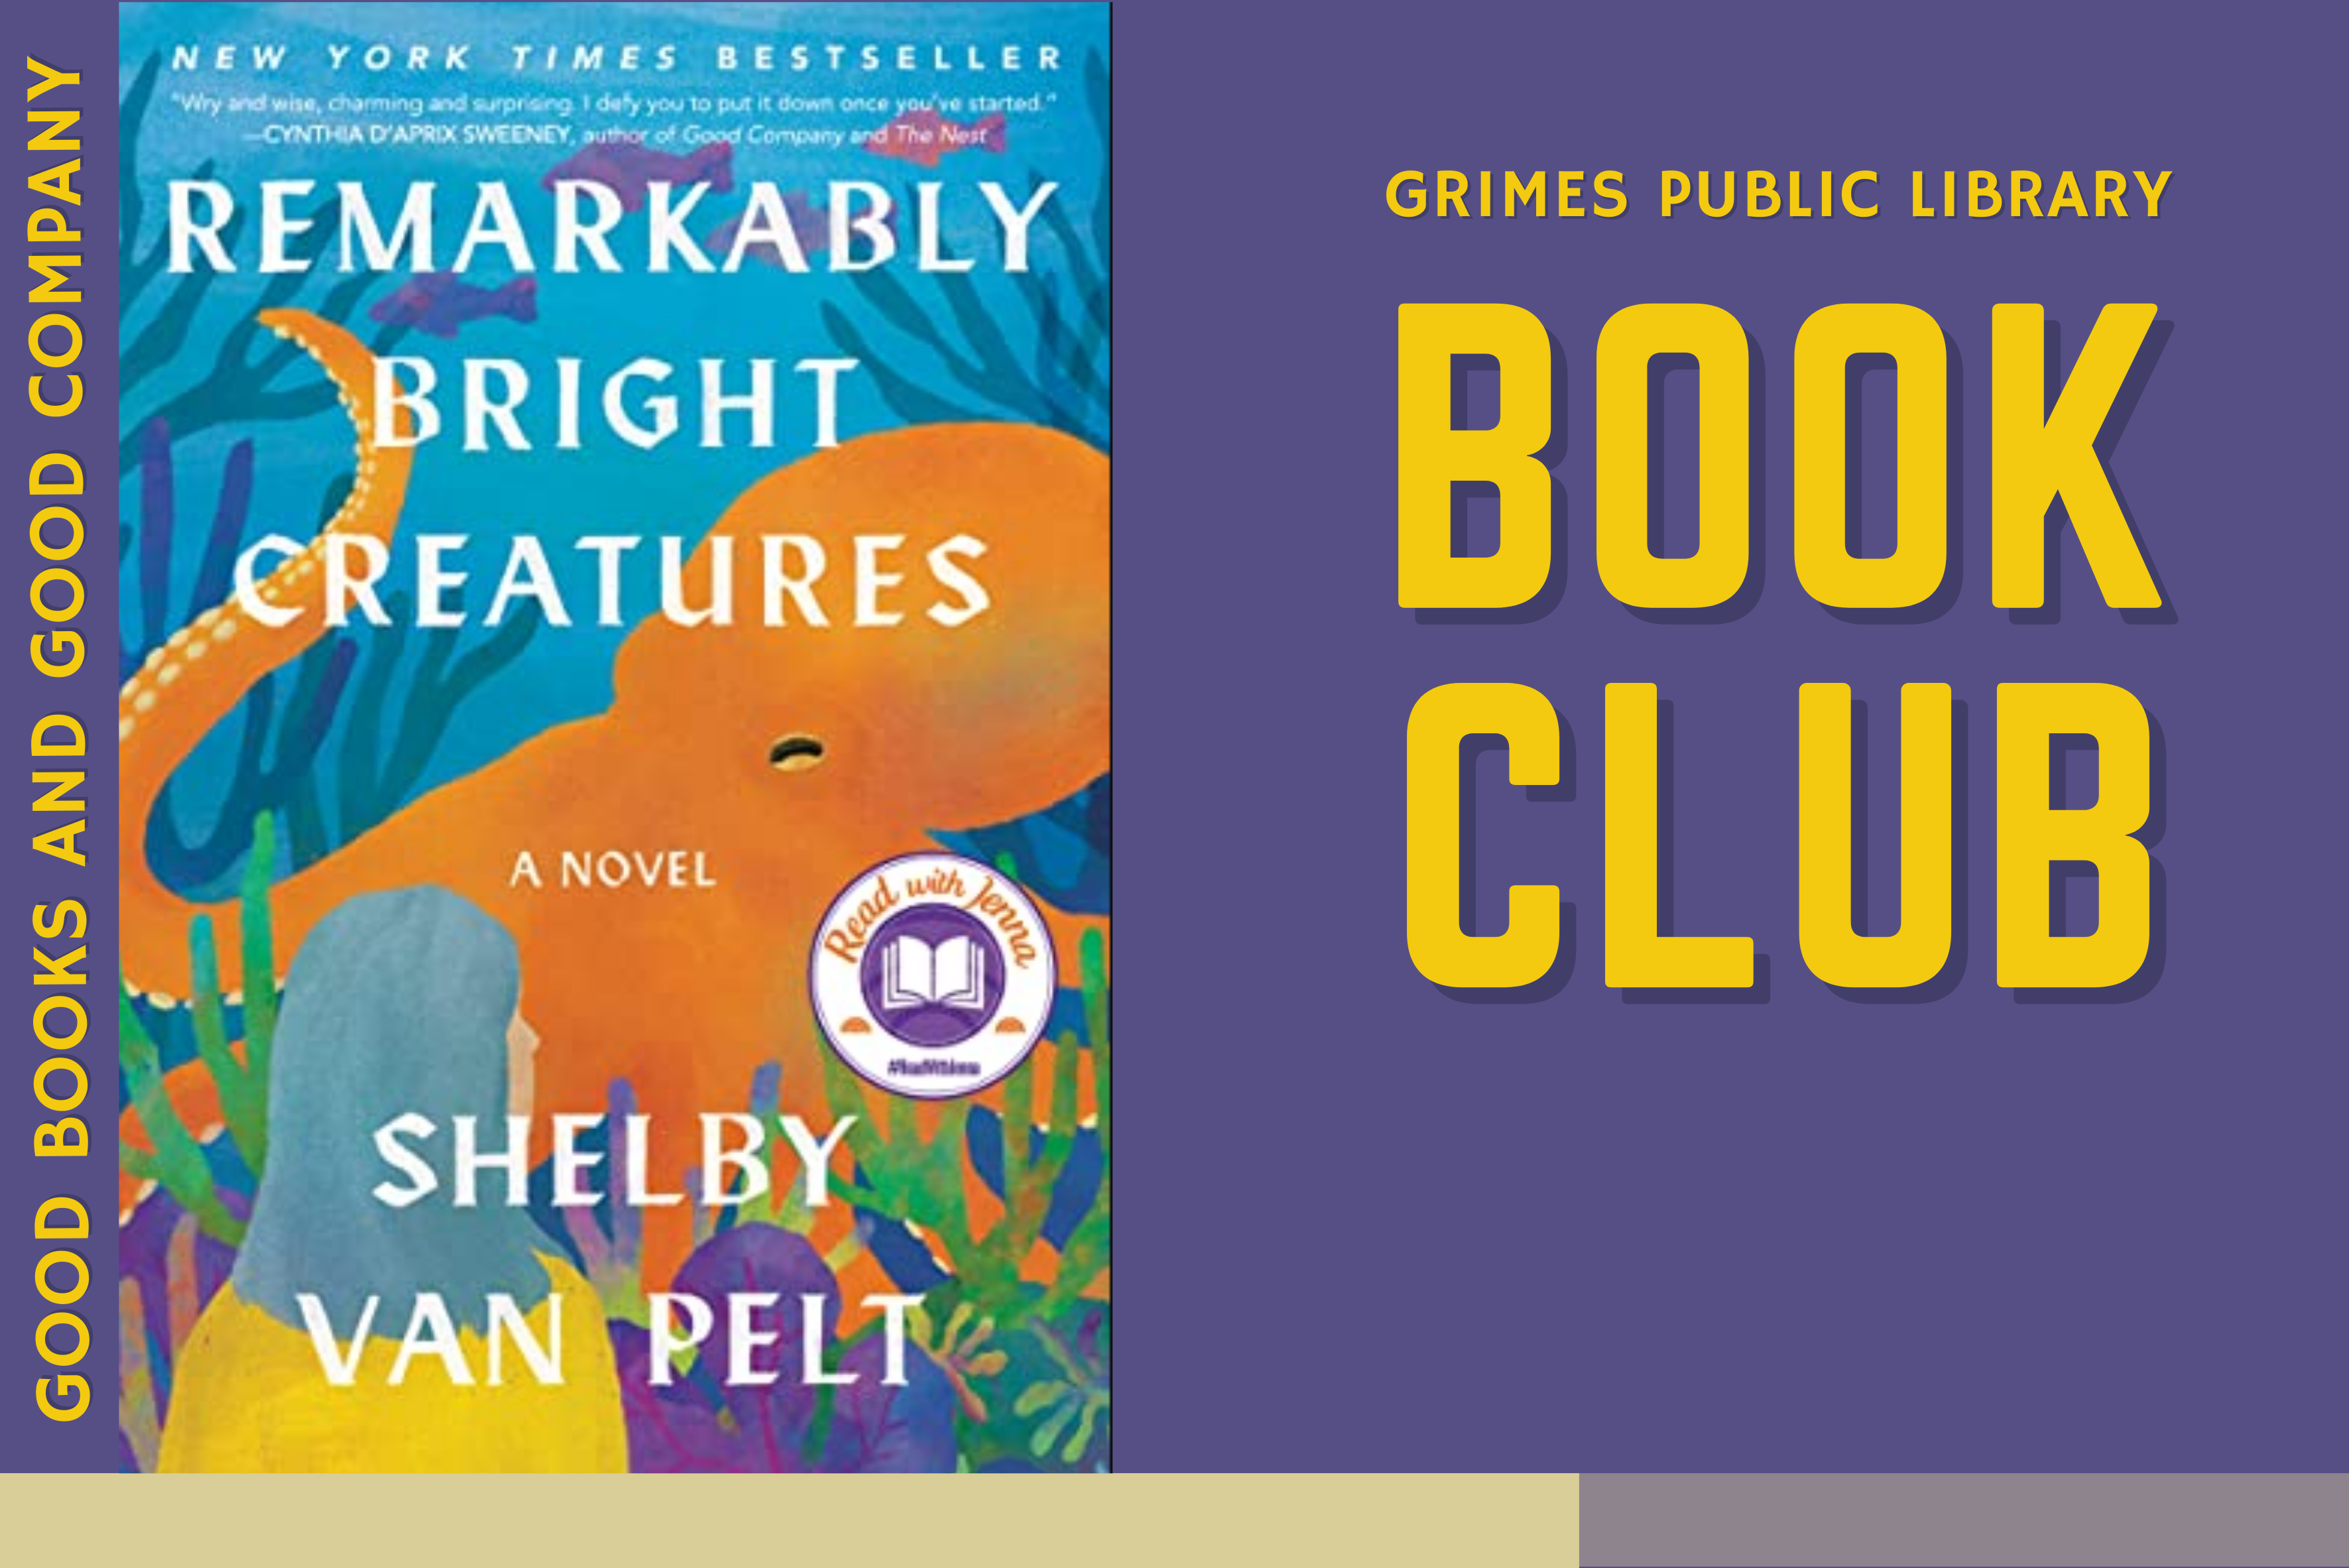 A picture of the cover of Remarkably Bright Creatures by Shelby Van Pelt